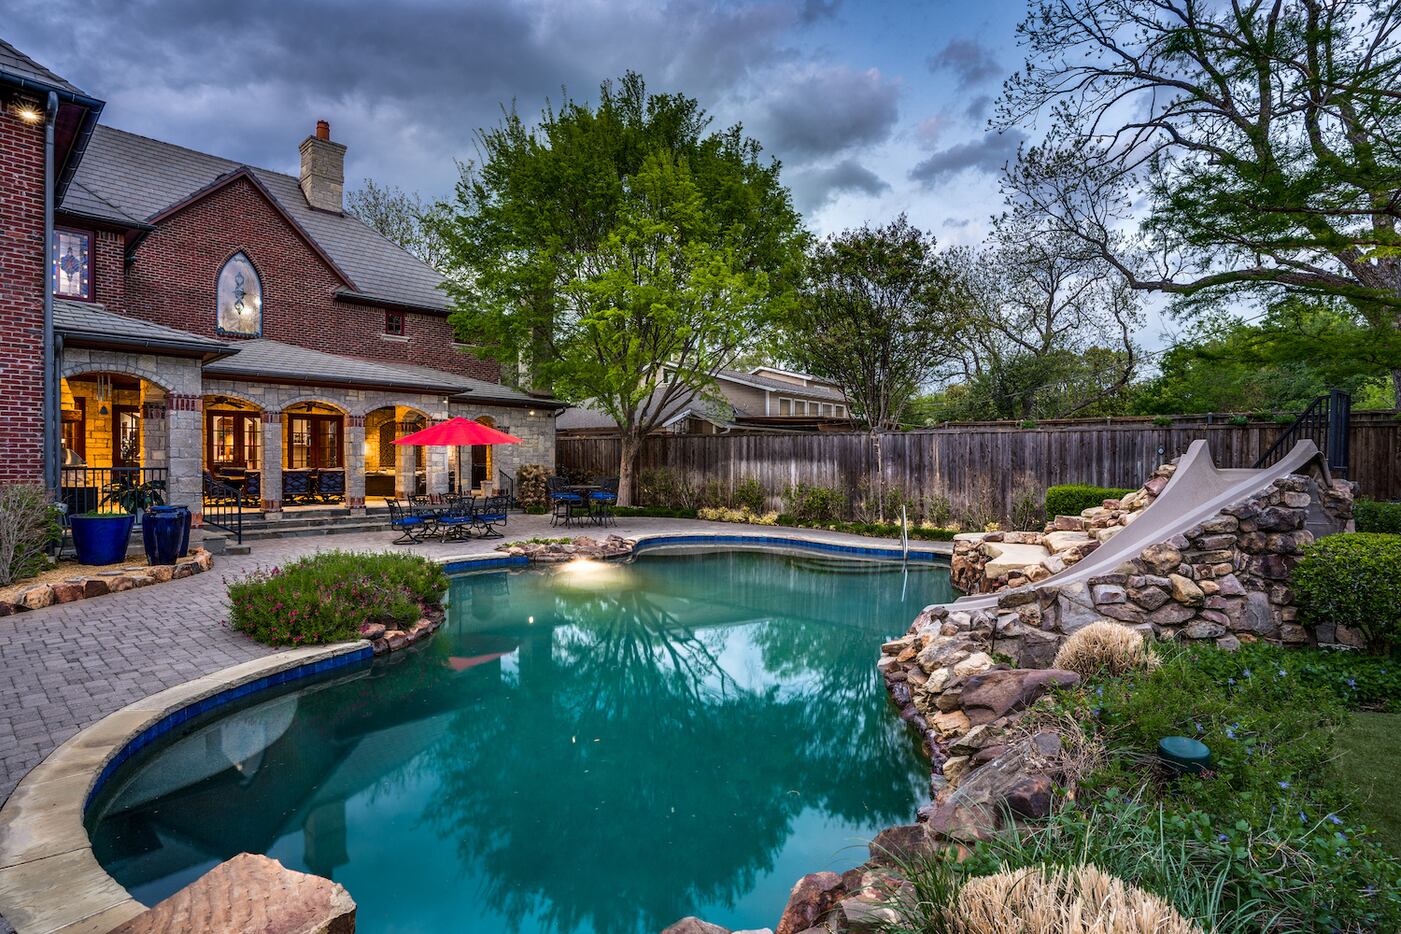 Take a look at the home at 5928 Glendora Ave. in Dallas.